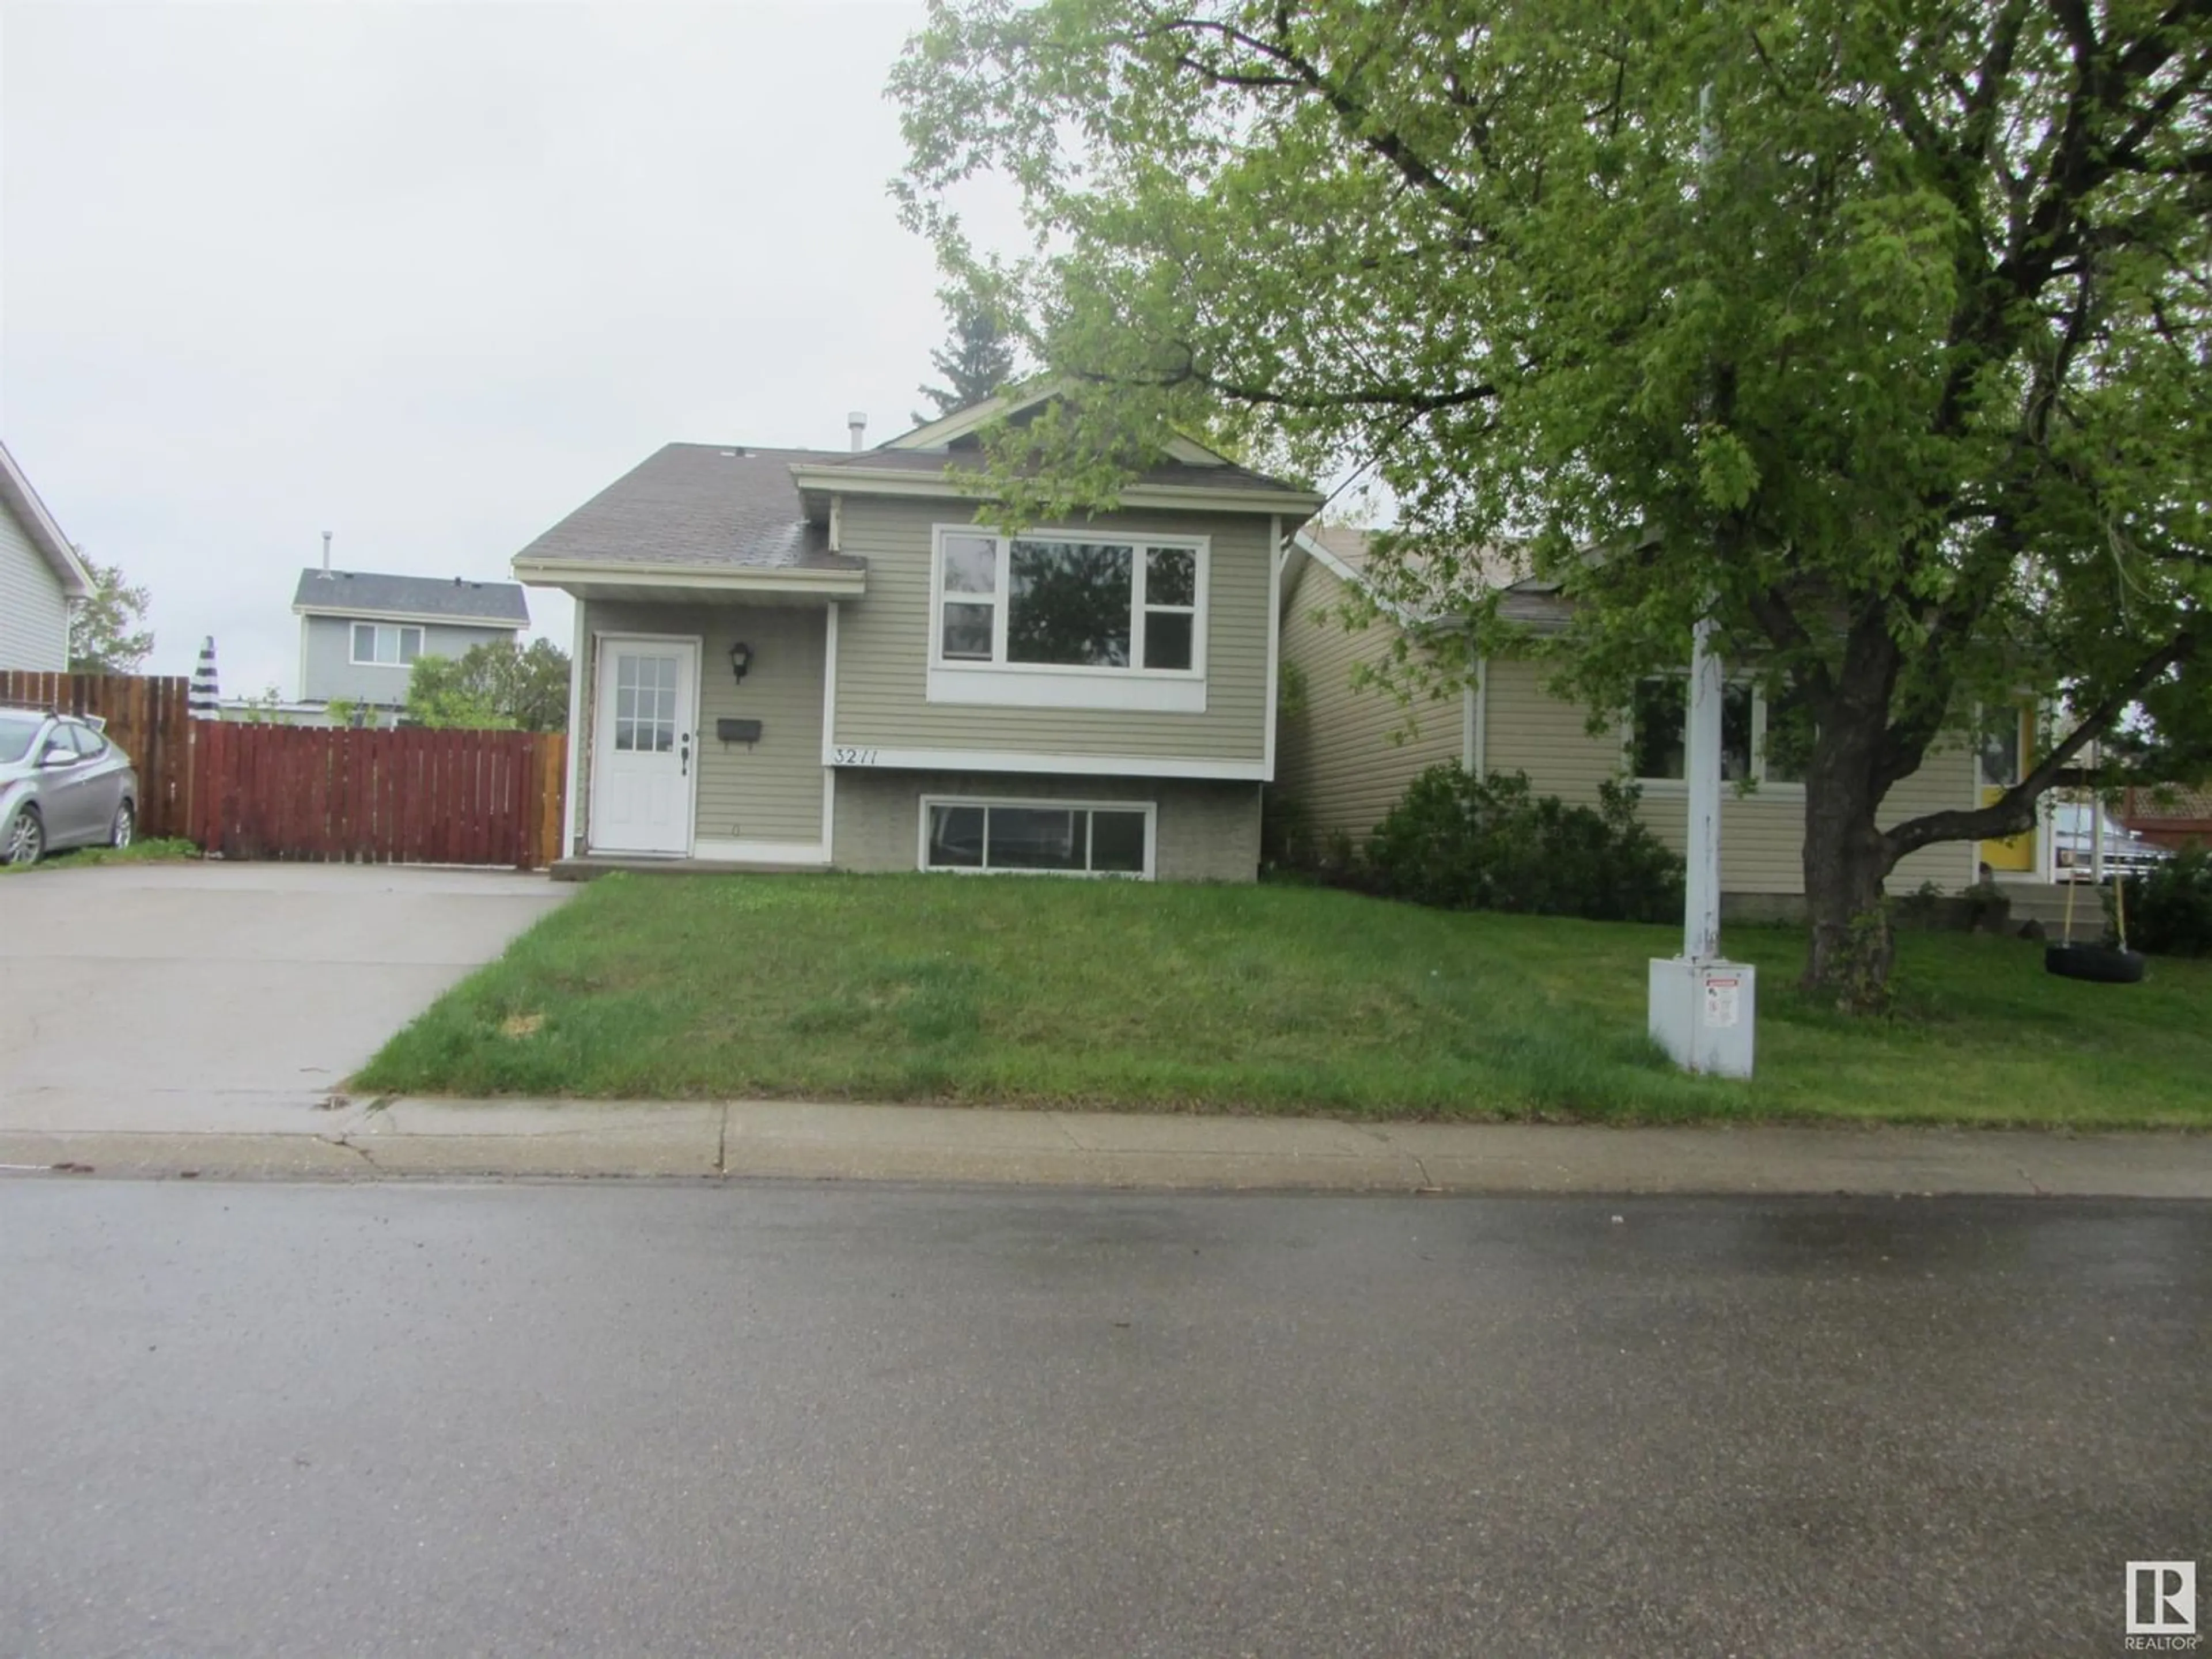 Frontside or backside of a home for 3211 47 ST NW, Edmonton Alberta T6L4R9